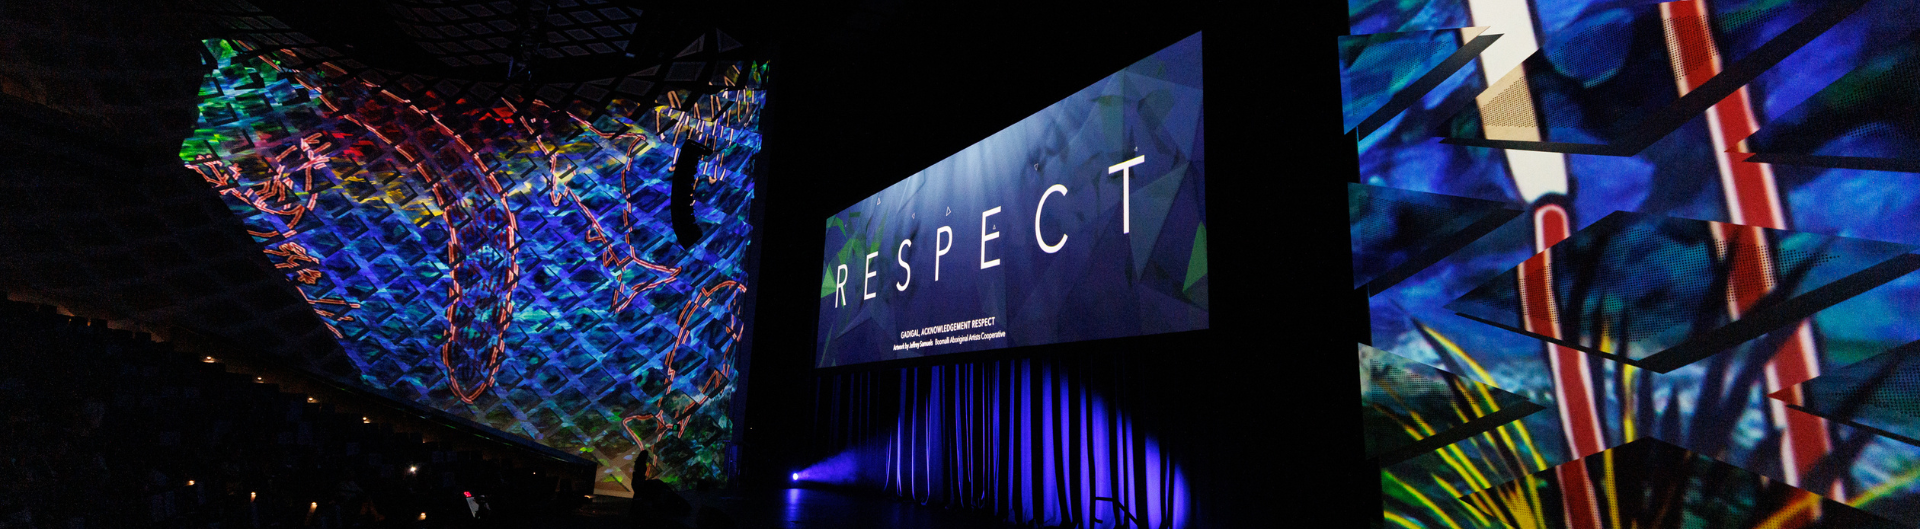 Audio visual displays at RESPECT - An ICC Sydney Experience, hosted in Darling Harbour Theatre.